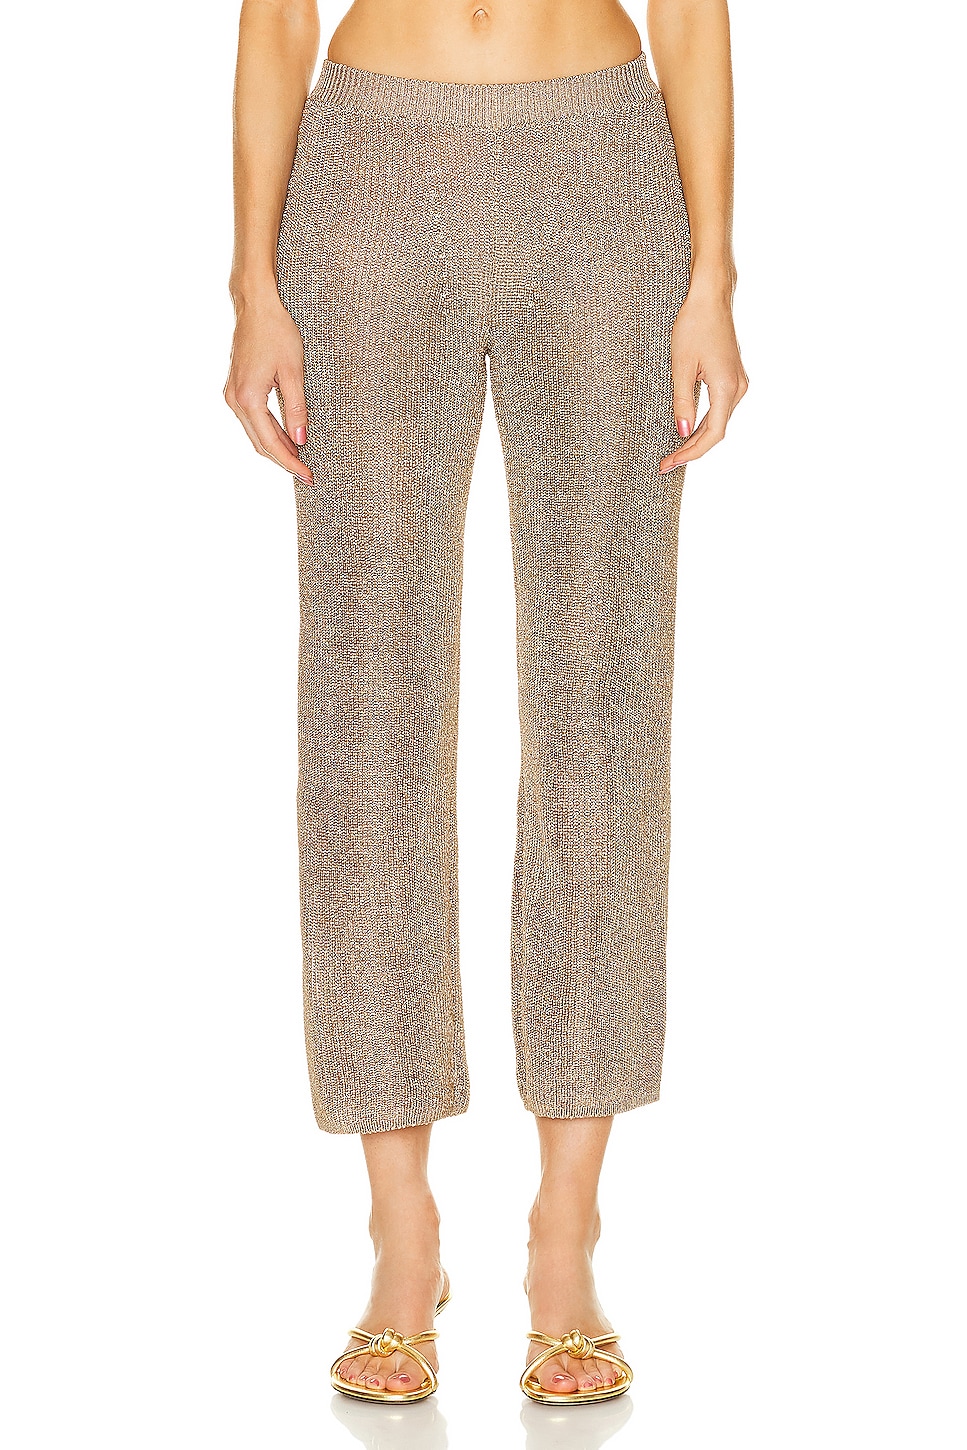 Lawena Fit To Flare Knit Pant in Brown